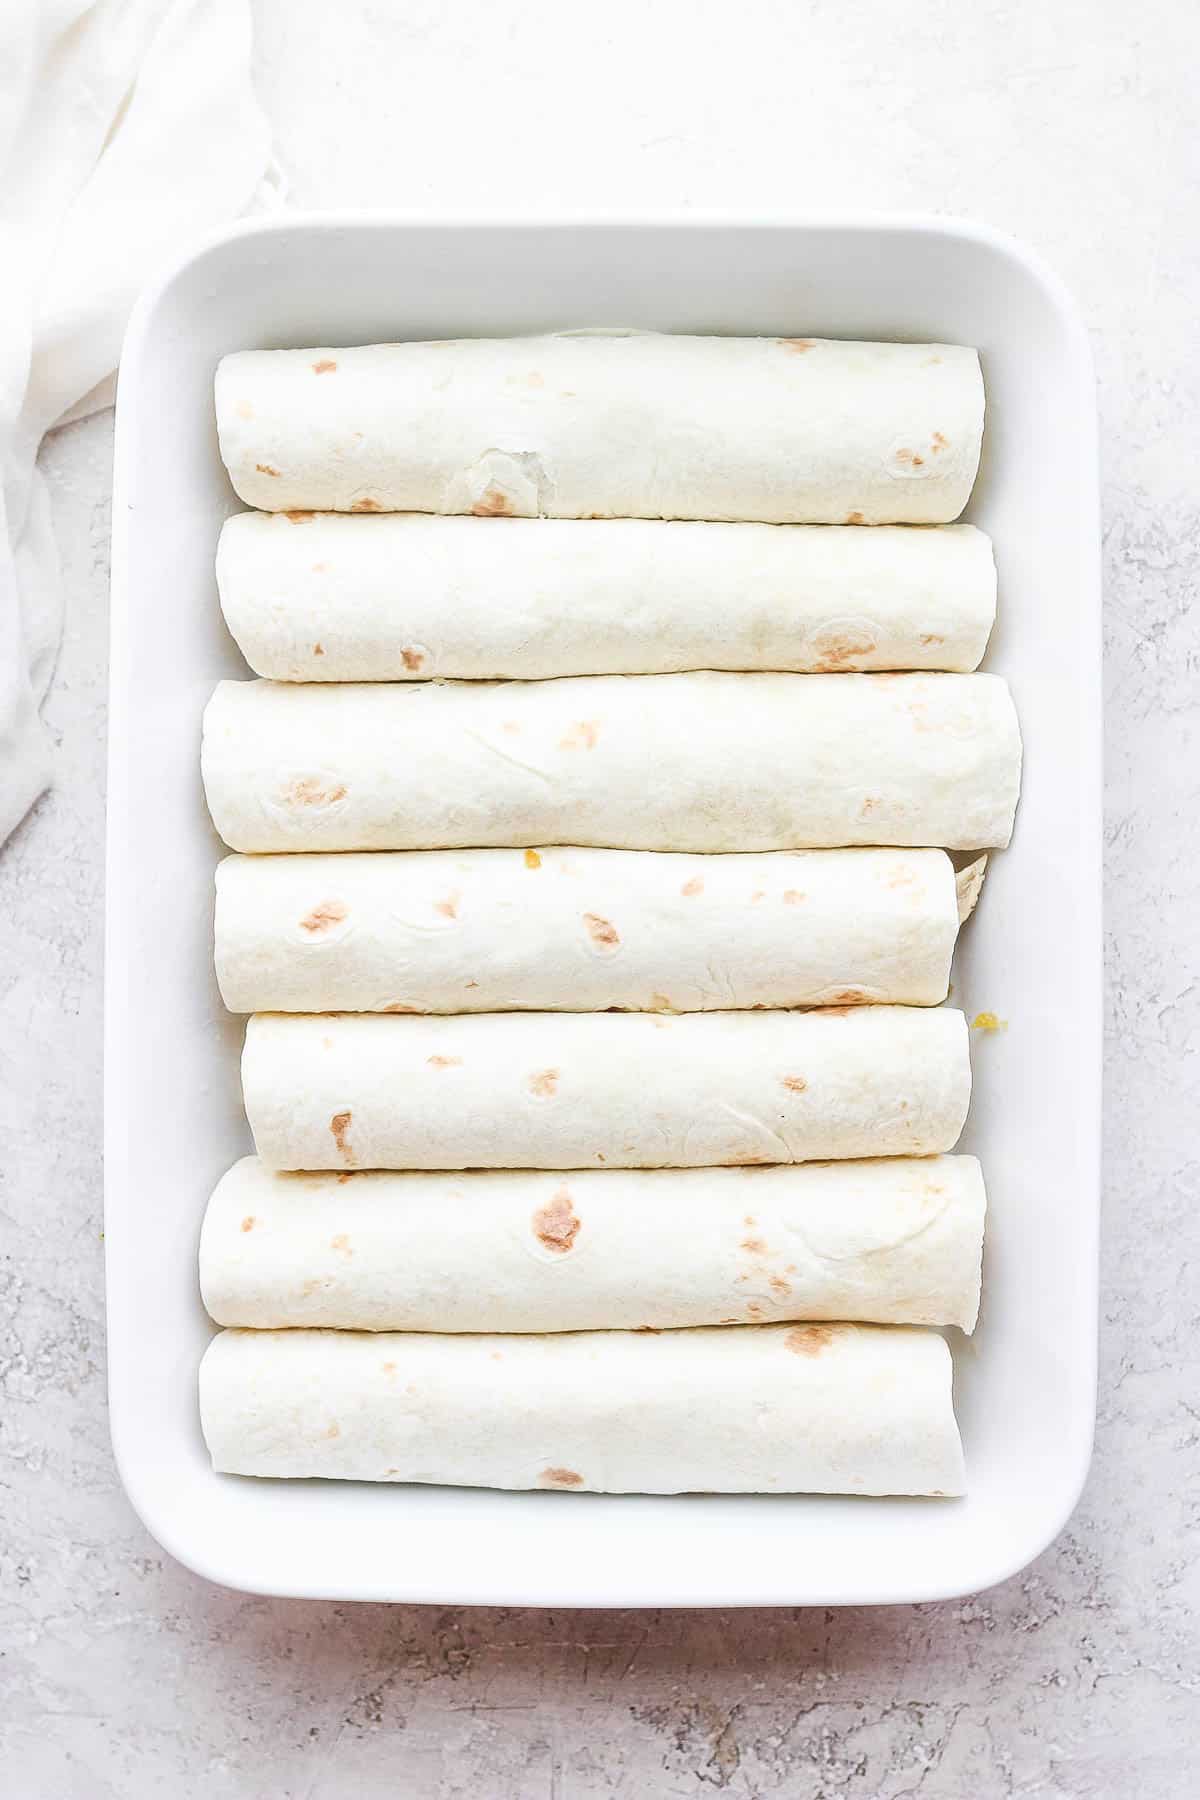 Rolled up chicken enchiladas in a pan before sauce and cheese are added.